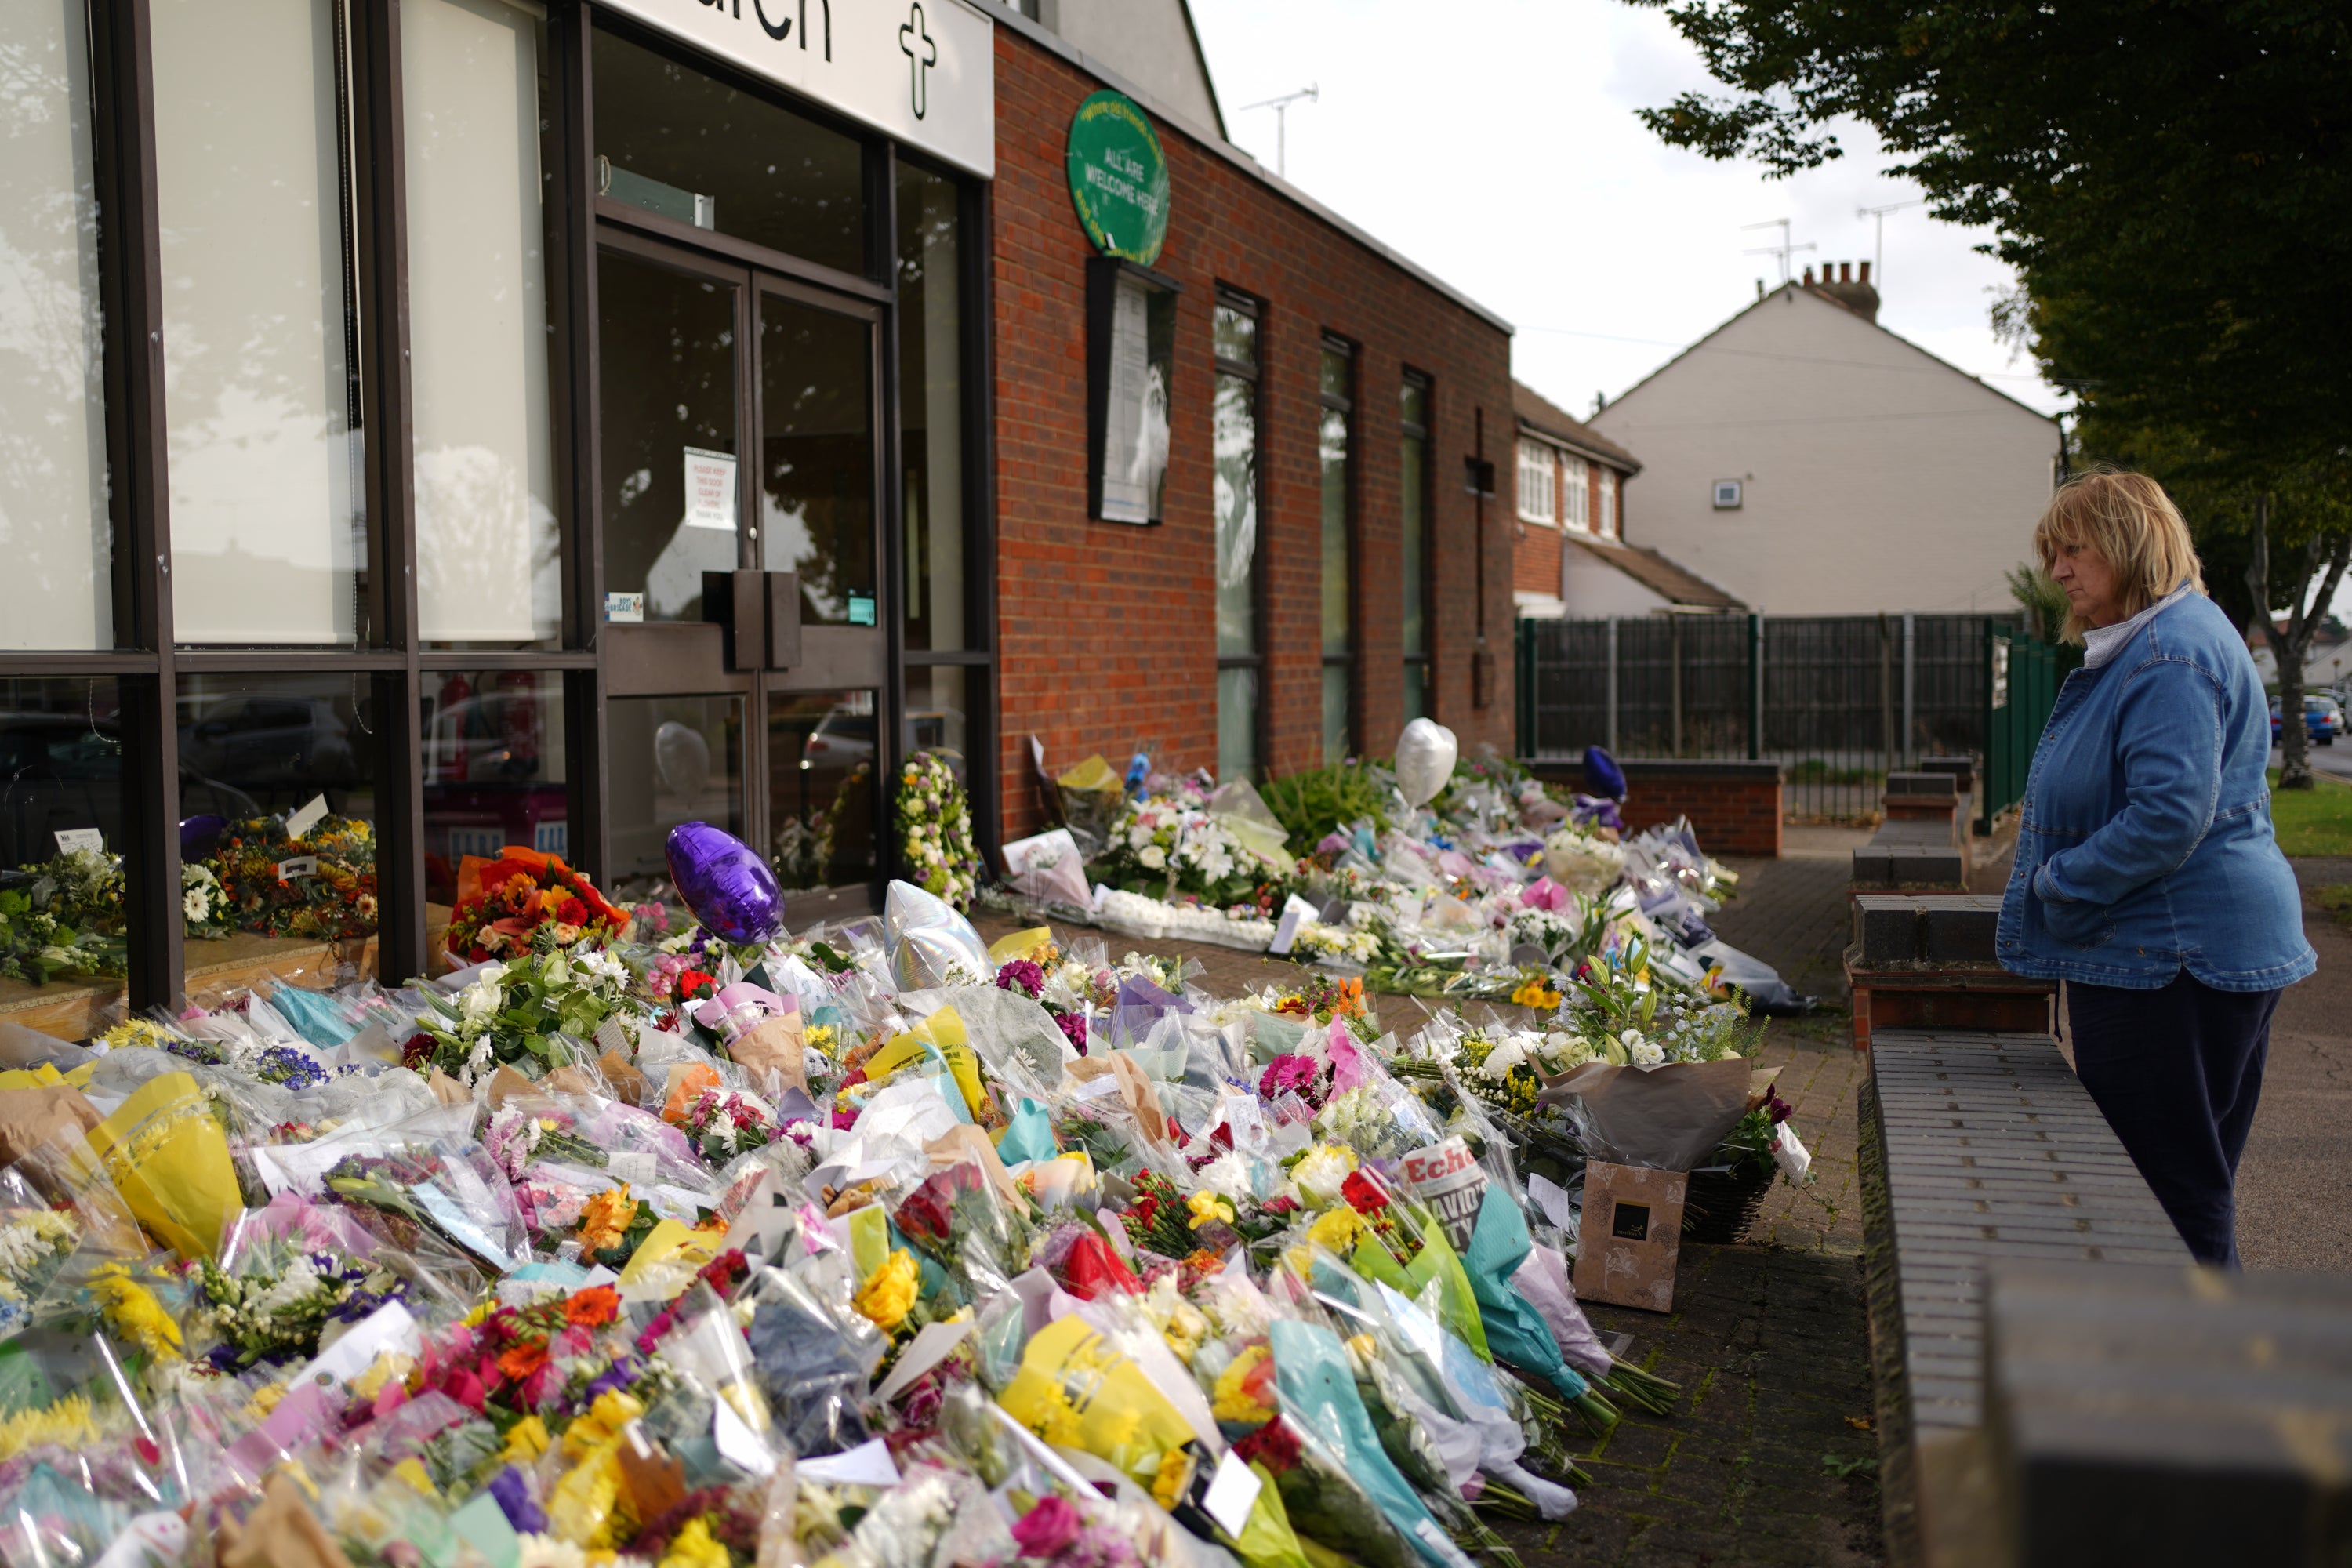 Floral tributes left outside Belfairs Methodist Church in Leigh-on-Sea, Essex (Joe Giddens/PA)